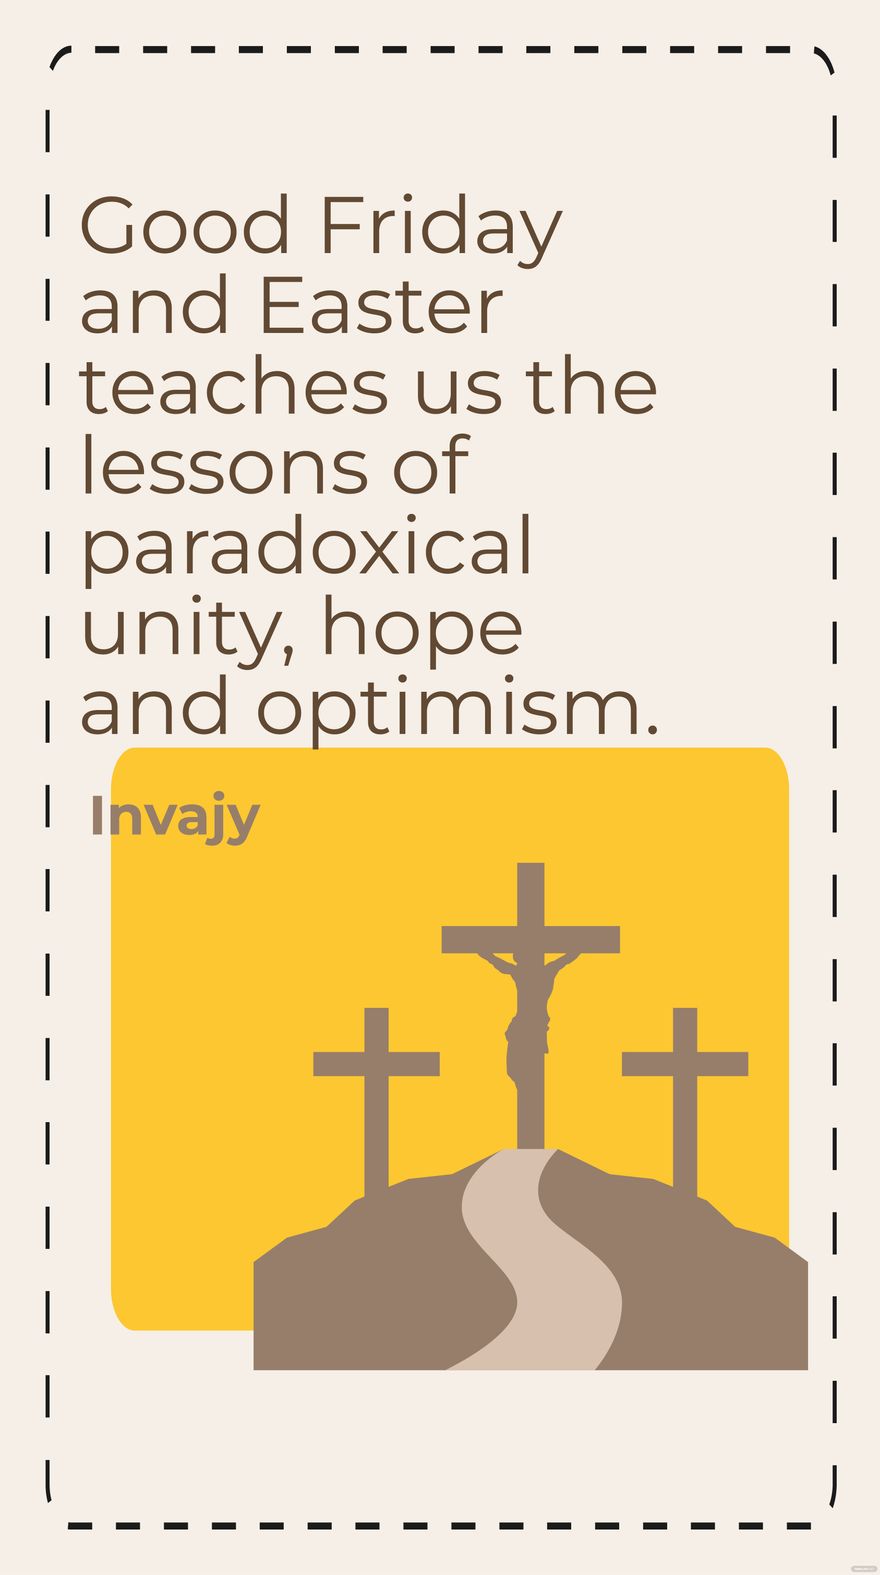 Free Invajy - Good Friday and Easter teaches us the lessons of paradoxical unity, hope and optimism.